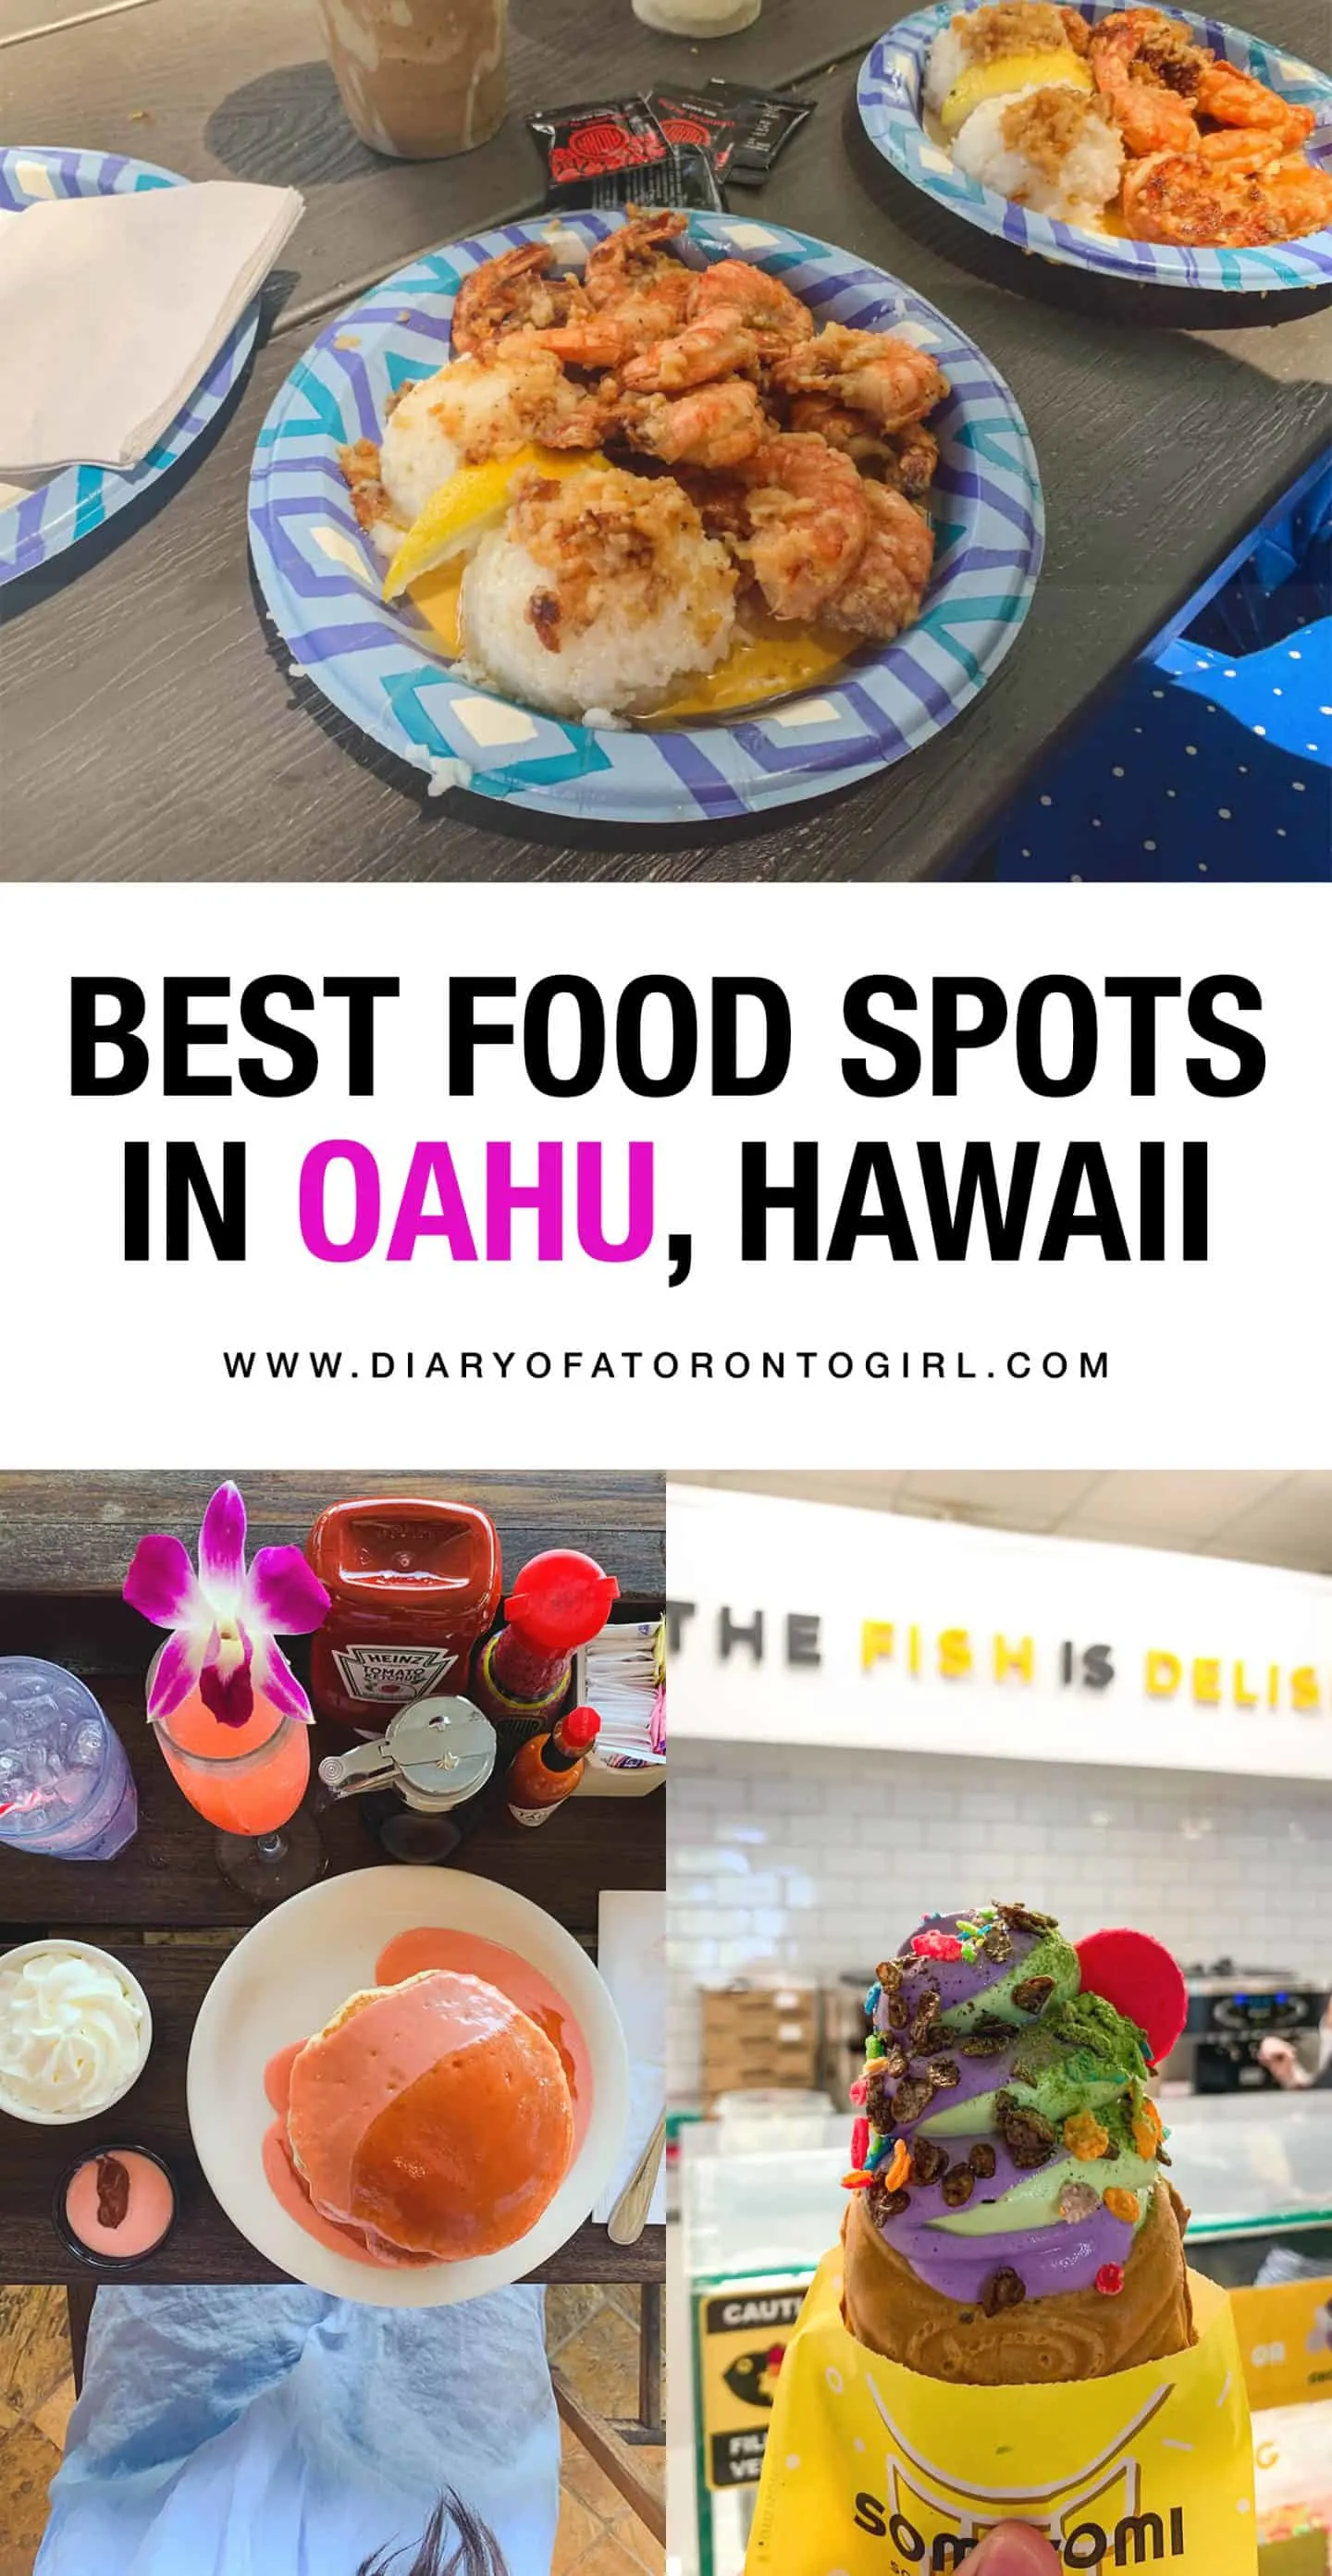 The best food spots to visit in Honolulu, Hawaii. Oahu is filled with amazing restaurants and great places to eat!